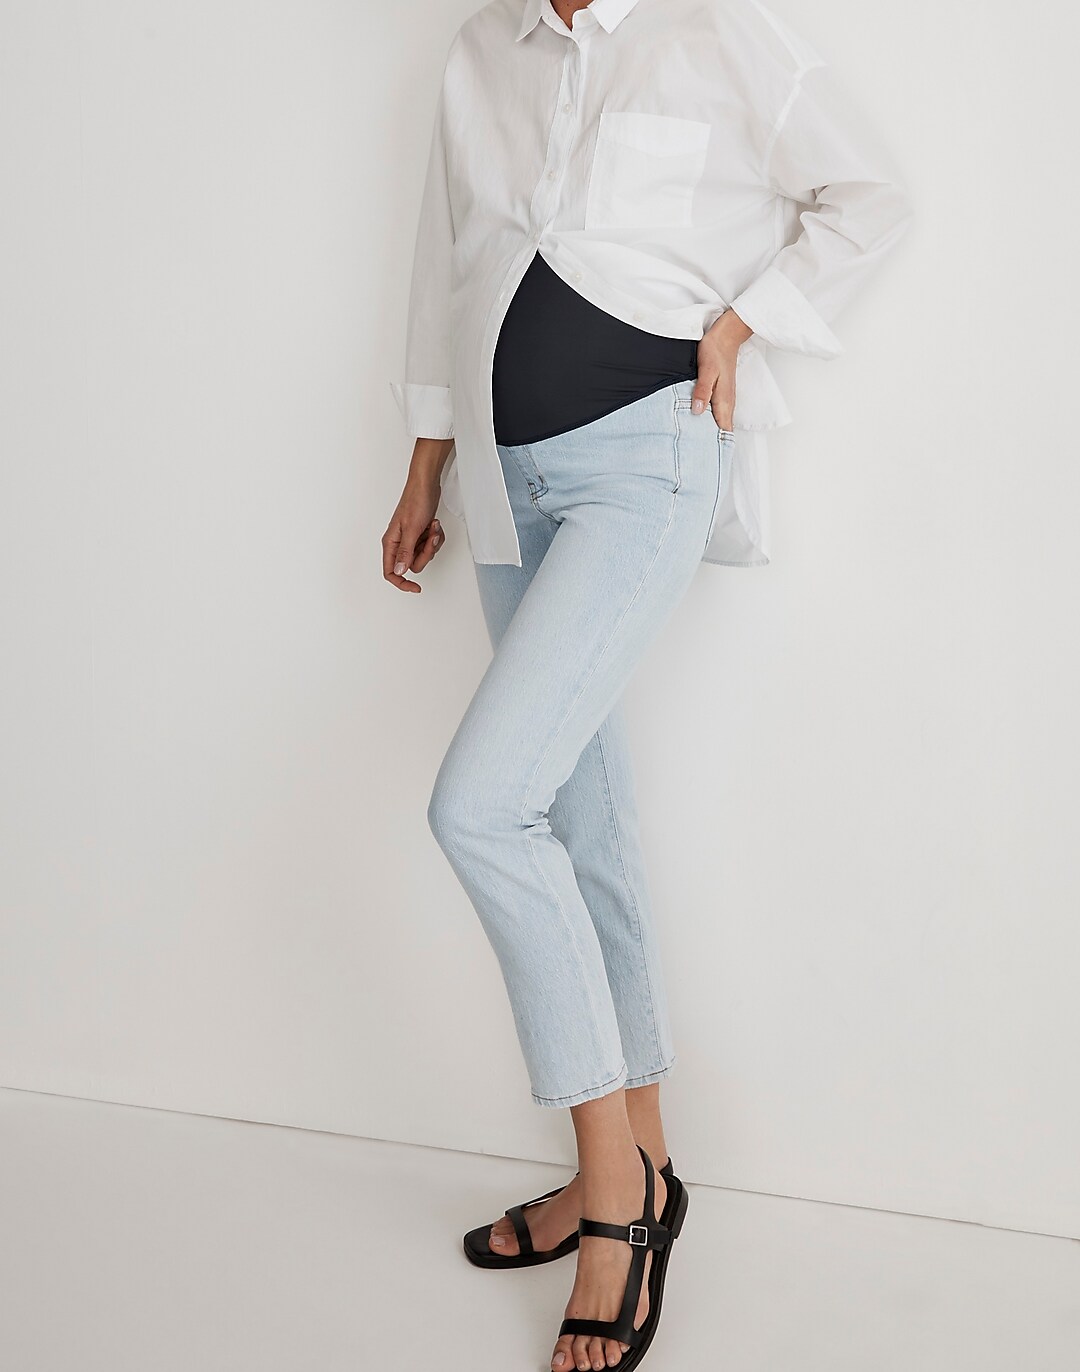 Over-the-Belly Perfect Jeans in Delora Wash